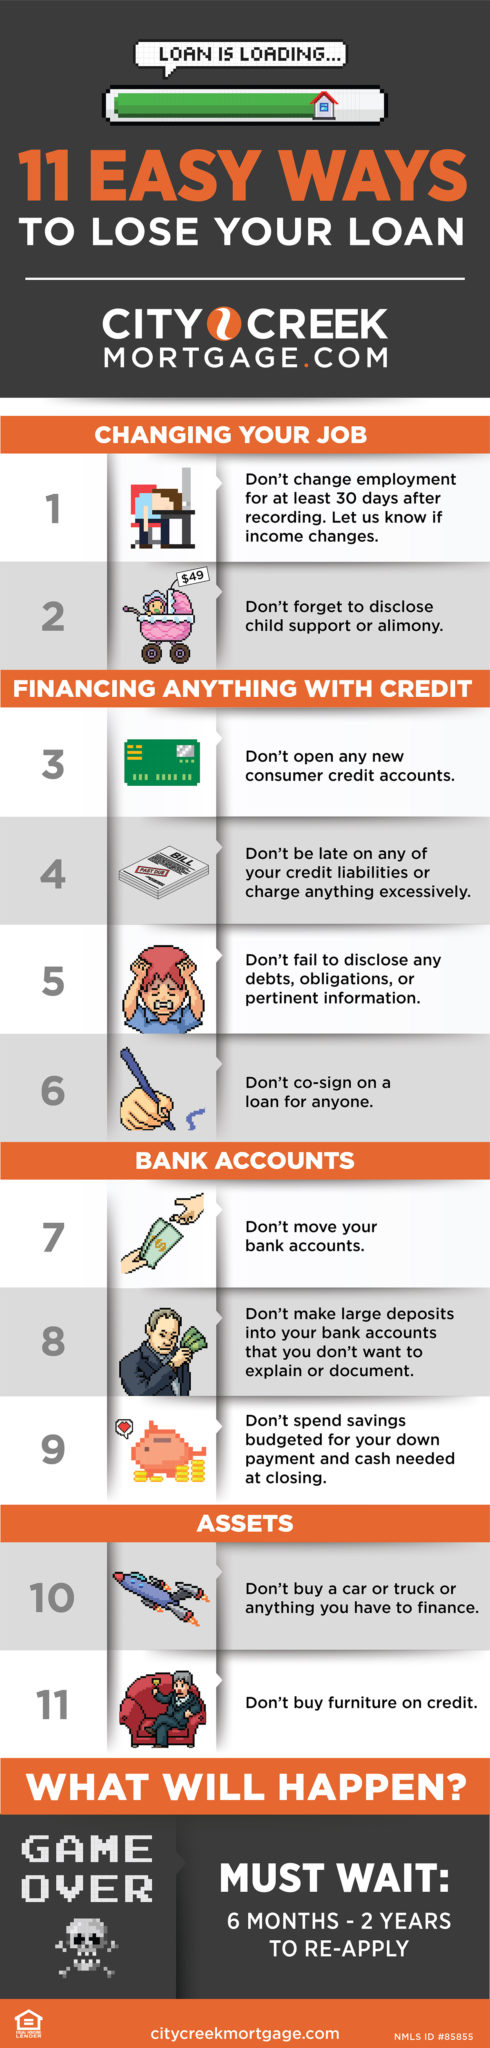 11 Easy Ways To Lose Your Home Loan | City Creek Mortgagee